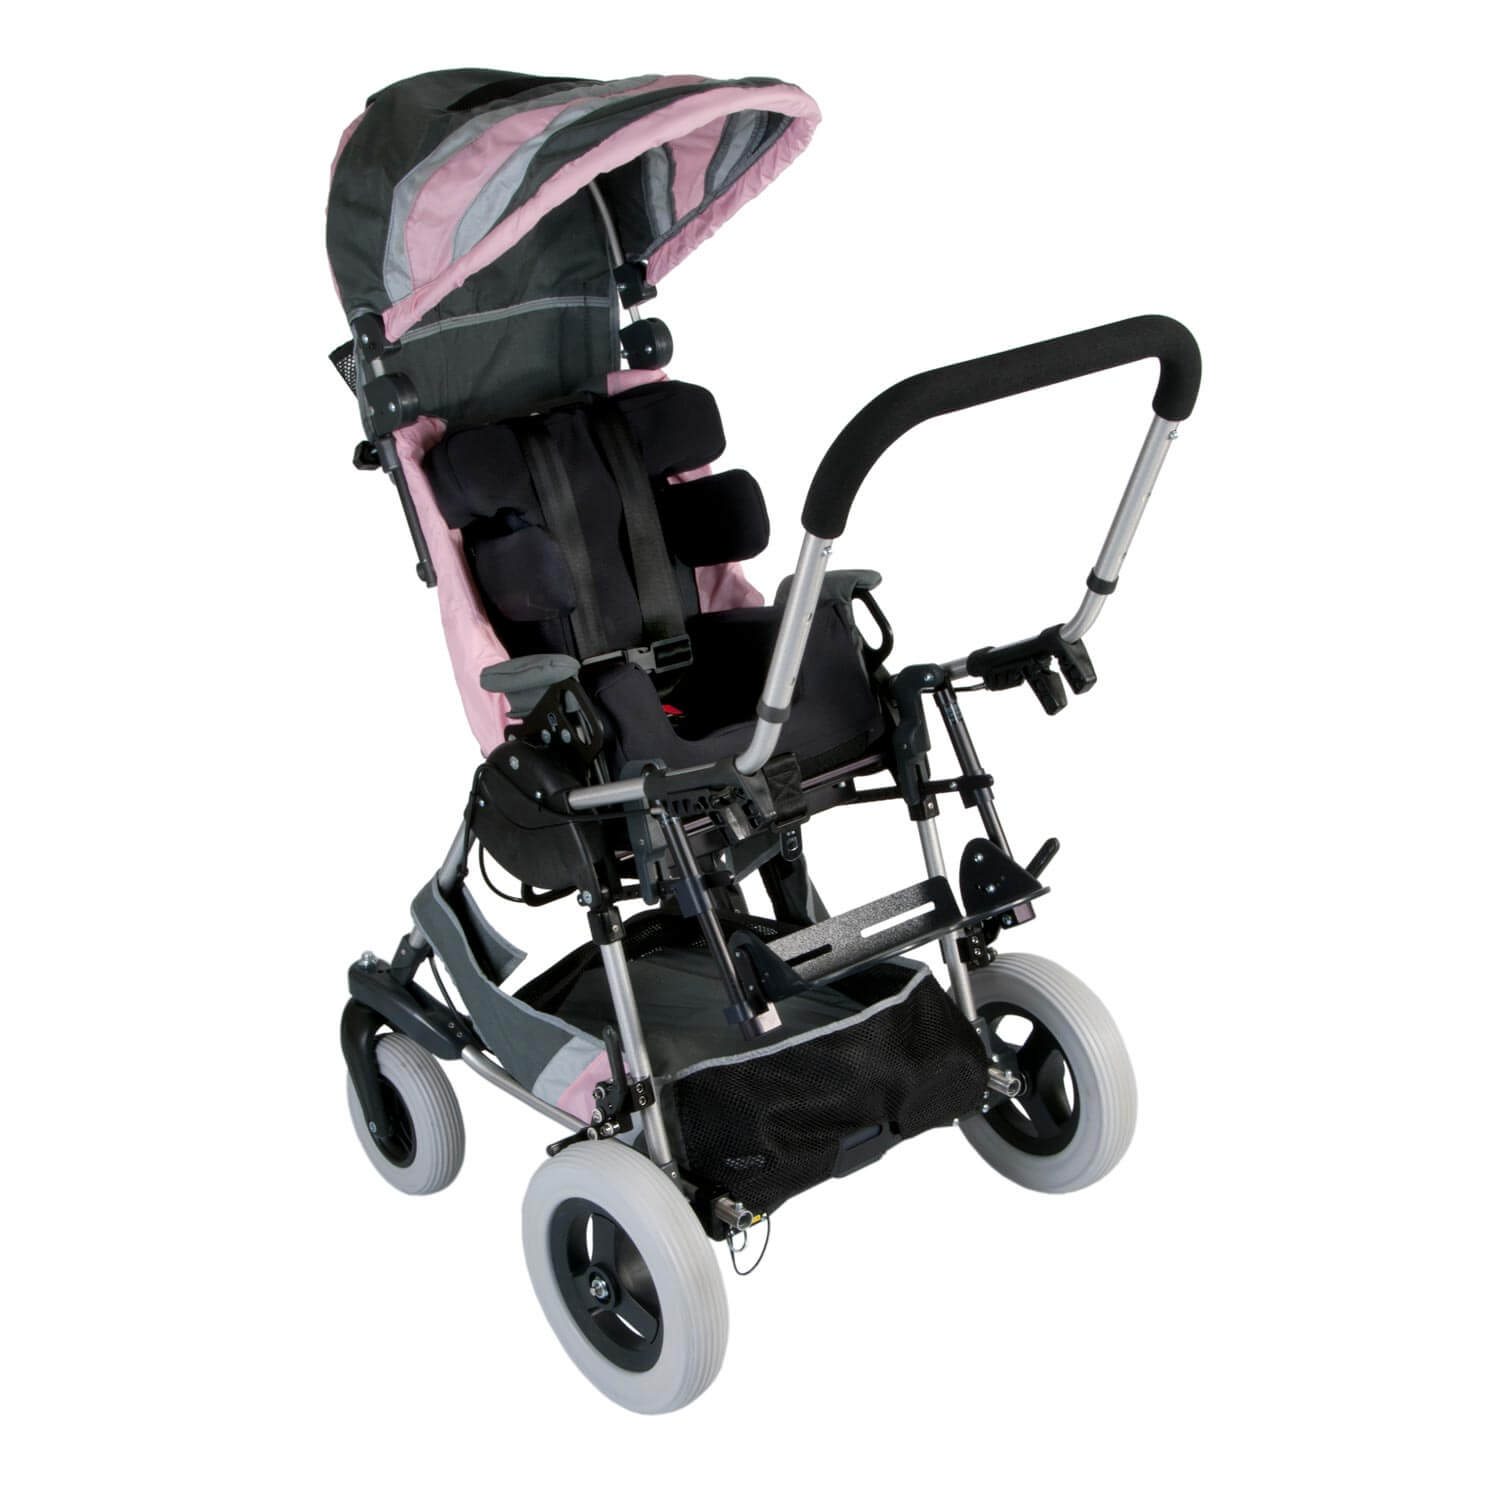 Introducing Stroller Xpress - The Mall At Short Hills